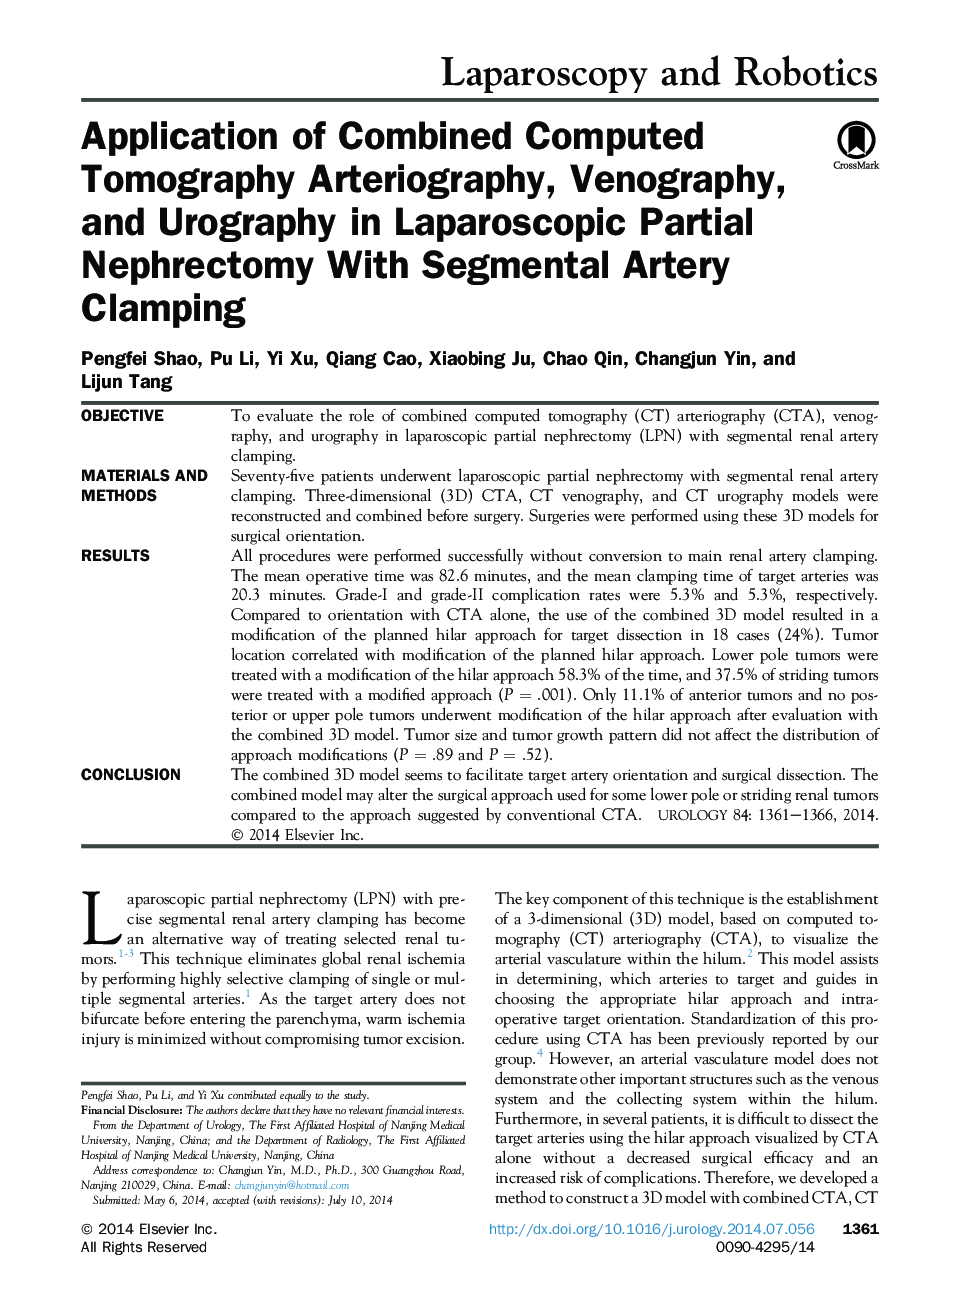 Application of Combined Computed Tomography Arteriography, Venography, and Urography in Laparoscopic Partial Nephrectomy With Segmental Artery Clamping 